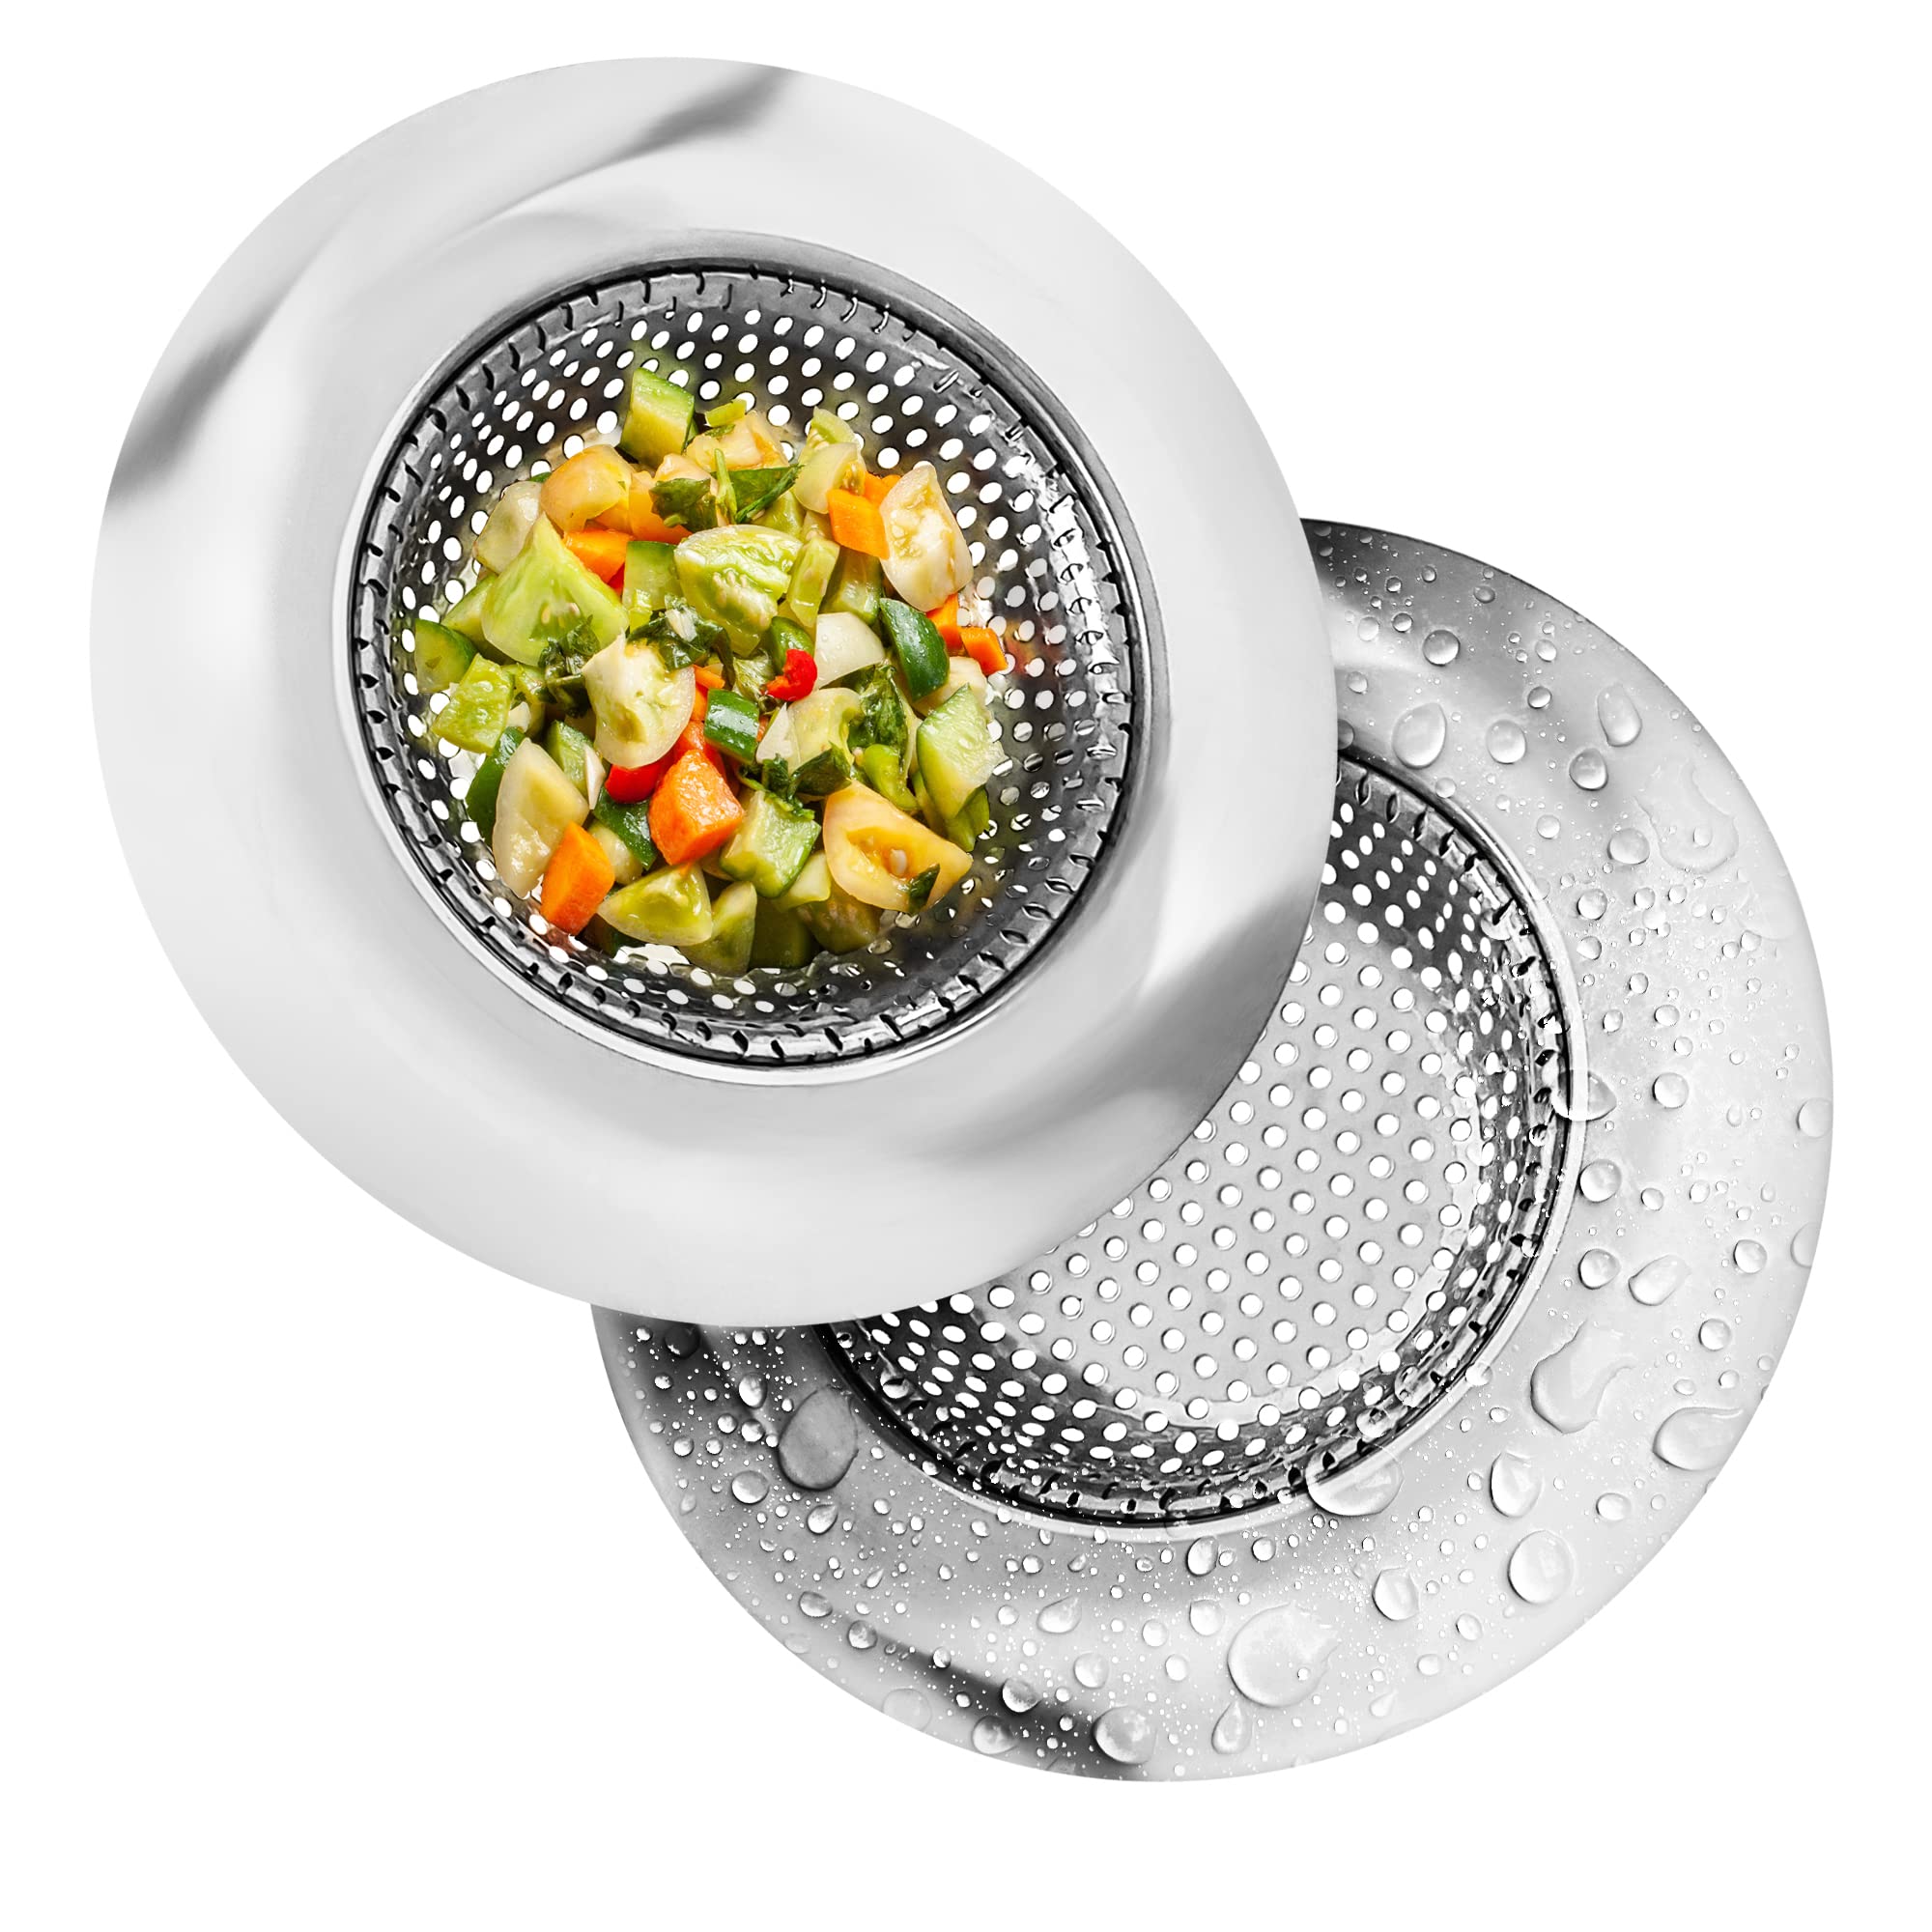 Book Cover SoLID (TM) Kitchen Sink Strainer Basket Catcher 2 pack 4.5 inch Diameter, Wide Rim Perfect for Most Sink Drains, Anti-Clogging Micro Perforation Holes, Rust Free, Dishwasher Safe